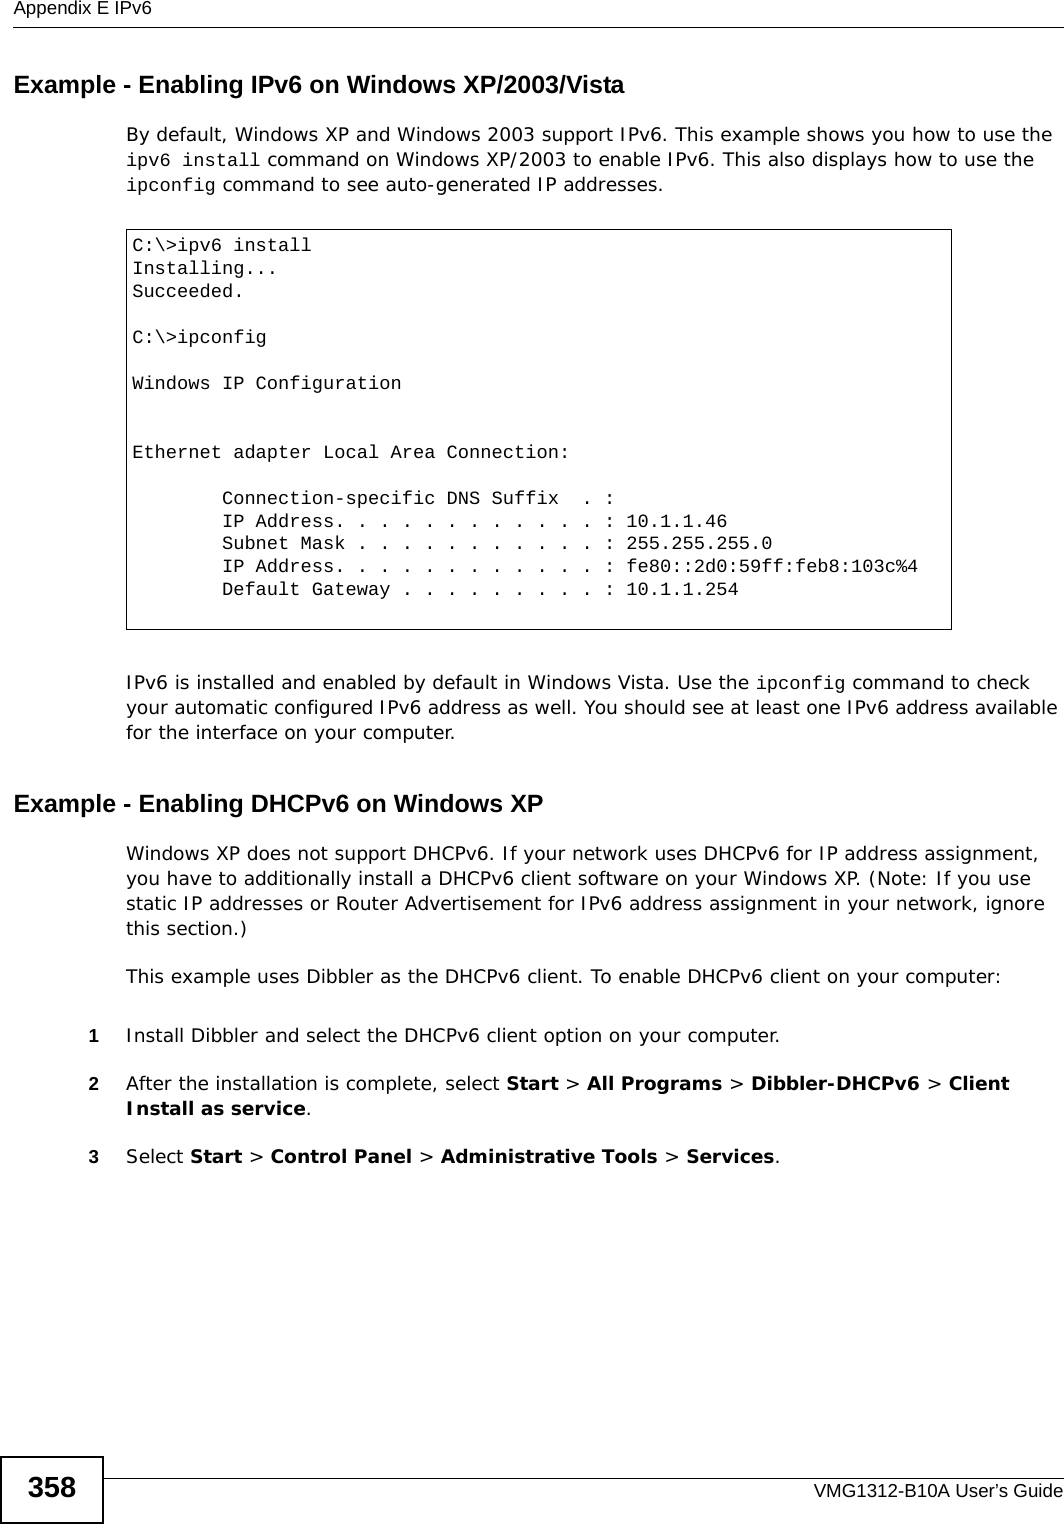 Appendix E IPv6VMG1312-B10A User’s Guide358Example - Enabling IPv6 on Windows XP/2003/VistaBy default, Windows XP and Windows 2003 support IPv6. This example shows you how to use the ipv6 install command on Windows XP/2003 to enable IPv6. This also displays how to use the ipconfig command to see auto-generated IP addresses.IPv6 is installed and enabled by default in Windows Vista. Use the ipconfig command to check your automatic configured IPv6 address as well. You should see at least one IPv6 address available for the interface on your computer.Example - Enabling DHCPv6 on Windows XPWindows XP does not support DHCPv6. If your network uses DHCPv6 for IP address assignment, you have to additionally install a DHCPv6 client software on your Windows XP. (Note: If you use static IP addresses or Router Advertisement for IPv6 address assignment in your network, ignore this section.)This example uses Dibbler as the DHCPv6 client. To enable DHCPv6 client on your computer:1Install Dibbler and select the DHCPv6 client option on your computer.2After the installation is complete, select Start &gt; All Programs &gt; Dibbler-DHCPv6 &gt; Client Install as service.3Select Start &gt; Control Panel &gt; Administrative Tools &gt; Services.C:\&gt;ipv6 installInstalling...Succeeded.C:\&gt;ipconfigWindows IP ConfigurationEthernet adapter Local Area Connection:        Connection-specific DNS Suffix  . :         IP Address. . . . . . . . . . . . : 10.1.1.46        Subnet Mask . . . . . . . . . . . : 255.255.255.0        IP Address. . . . . . . . . . . . : fe80::2d0:59ff:feb8:103c%4        Default Gateway . . . . . . . . . : 10.1.1.254